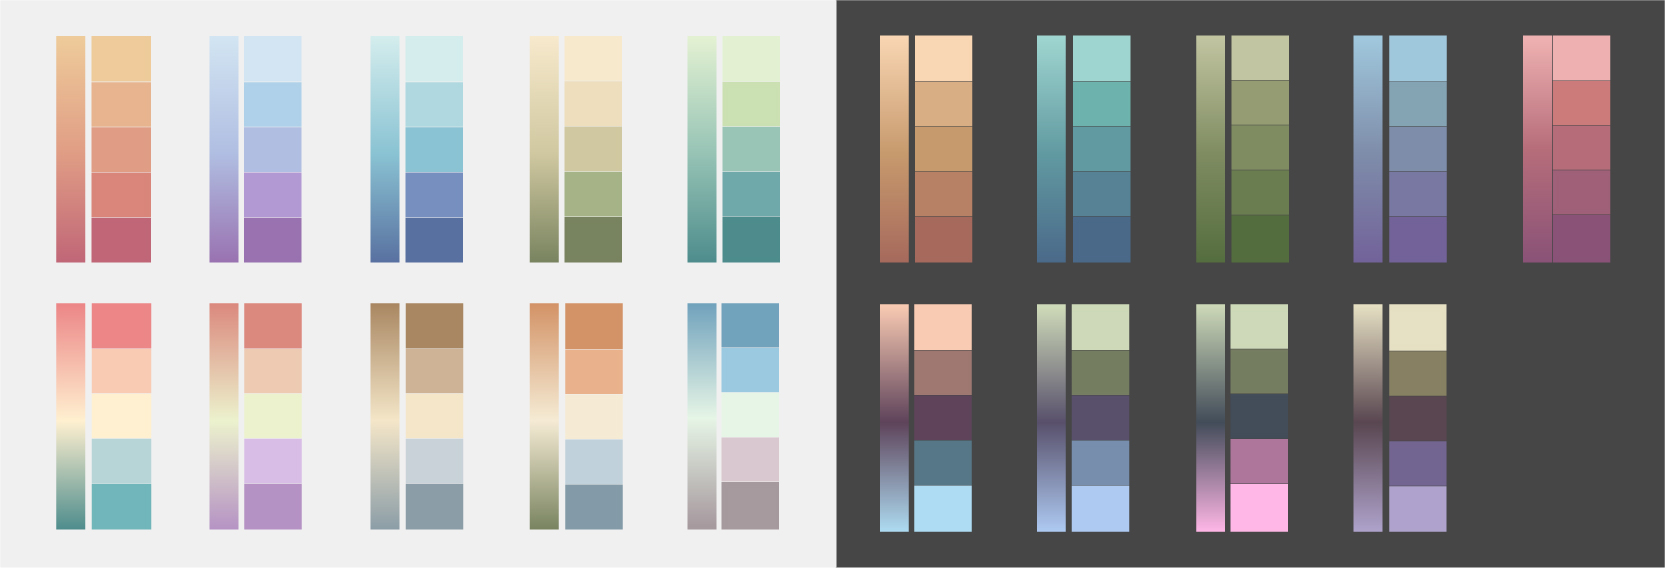 5-color graphics for the new subdued color ramps